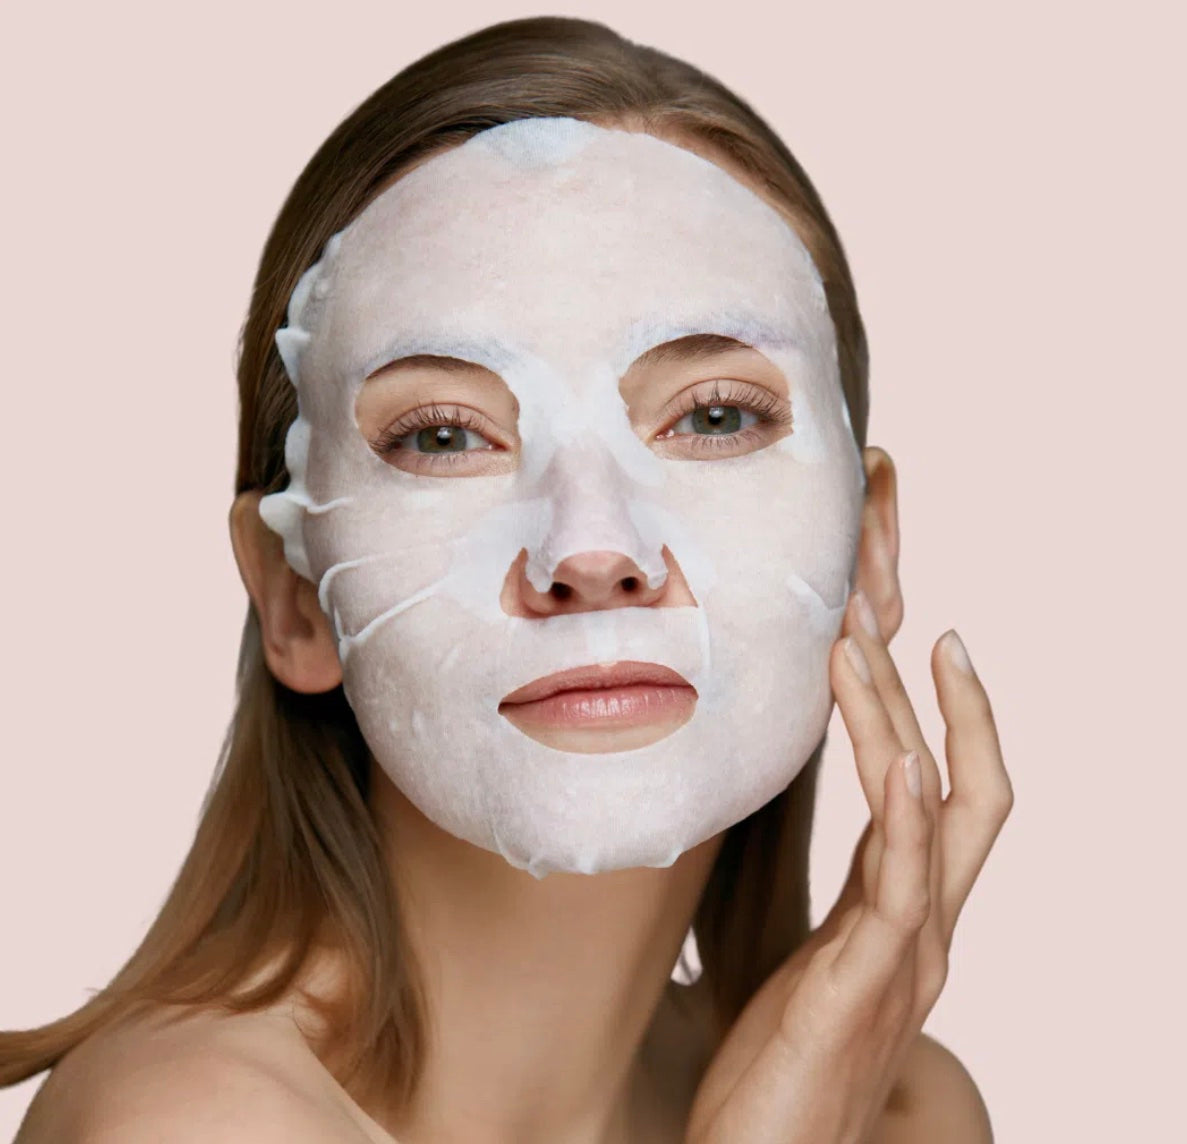 Beautical sheet face mask with peptides (1 pc.)